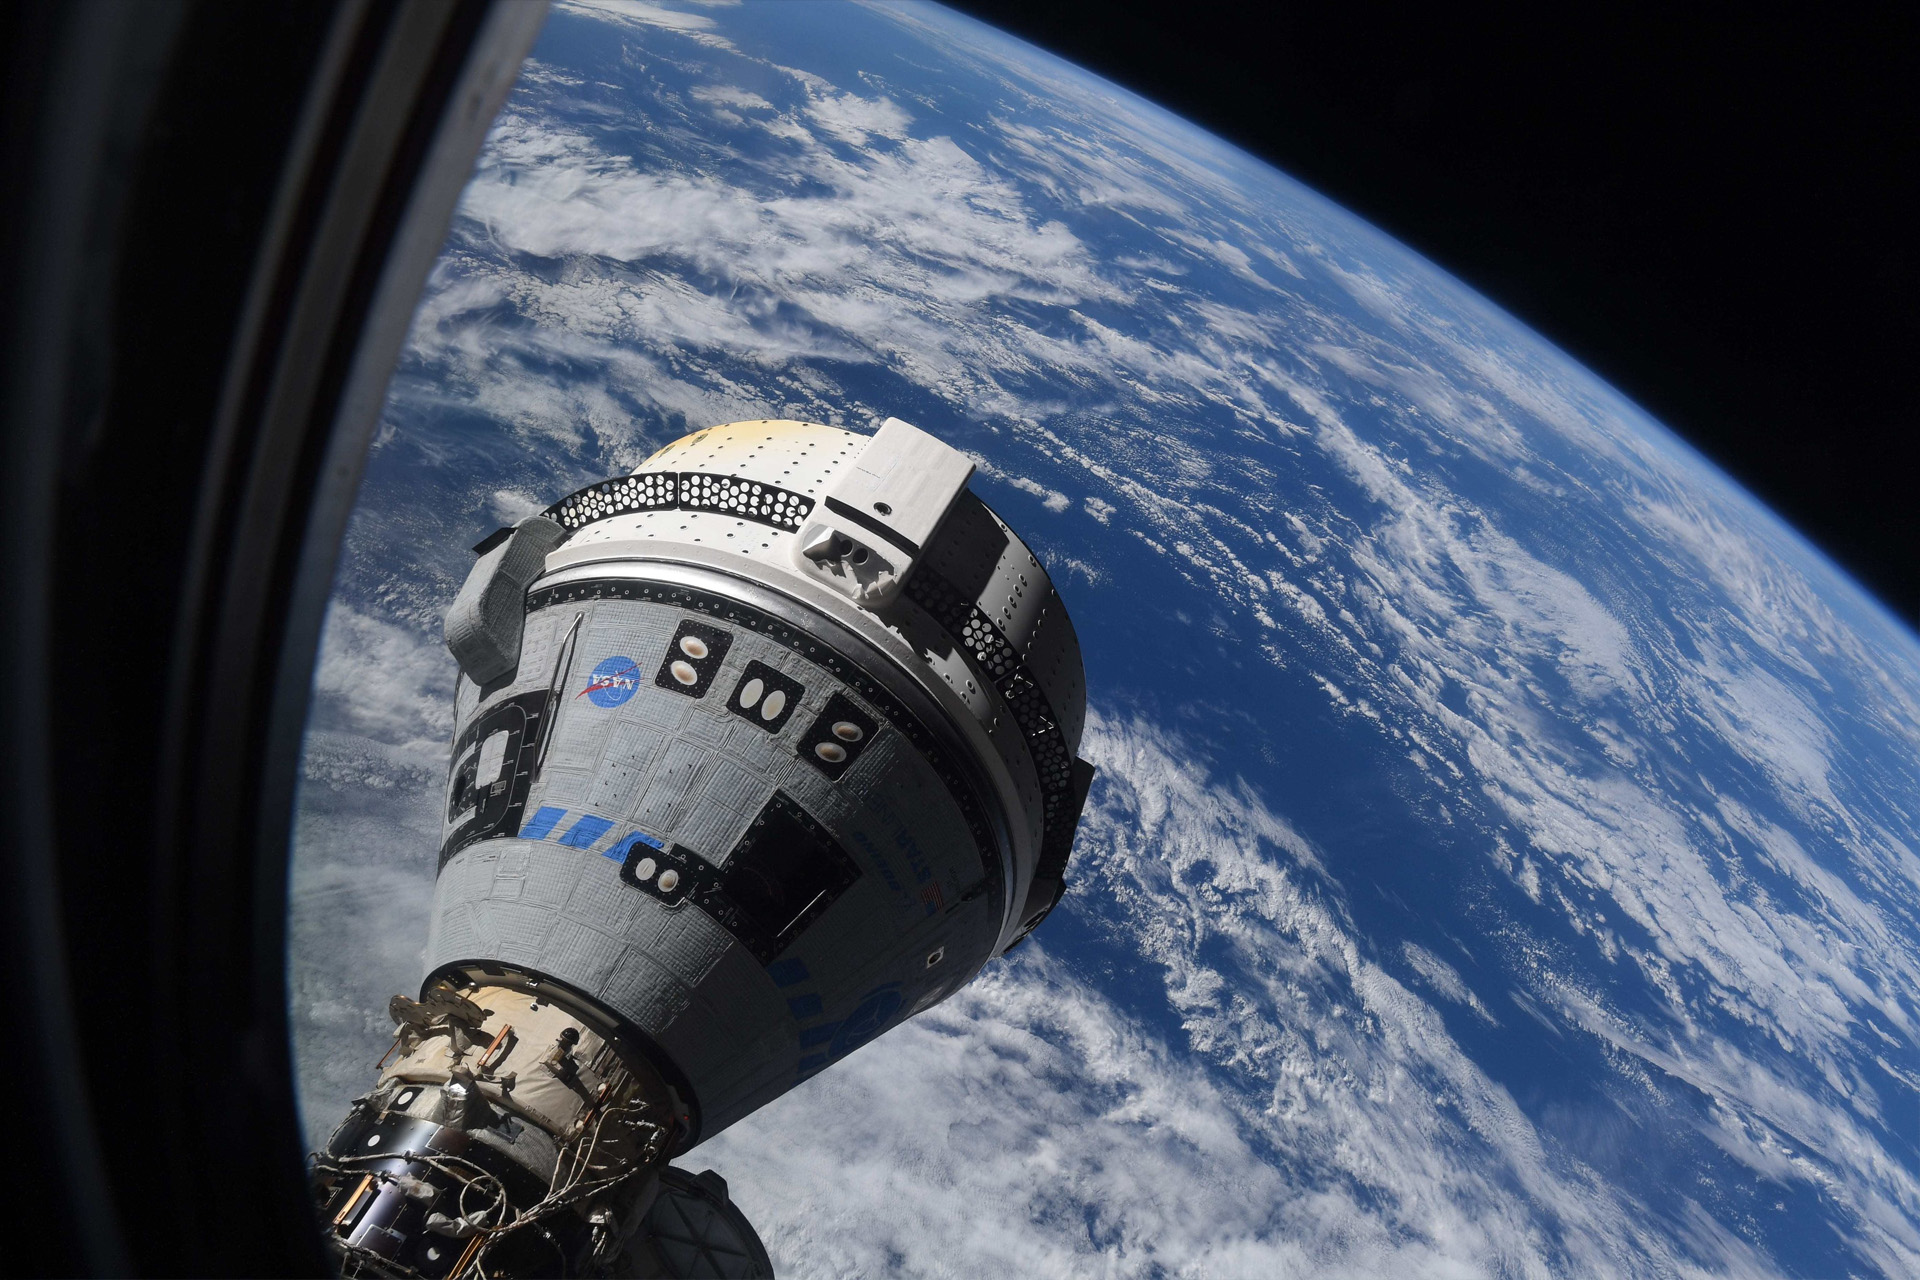 Boeing's Starliner OFT-2 spacecraft docked at the International Space Station as seen by European Space Agency astronaut Samantha Cristoforetti.